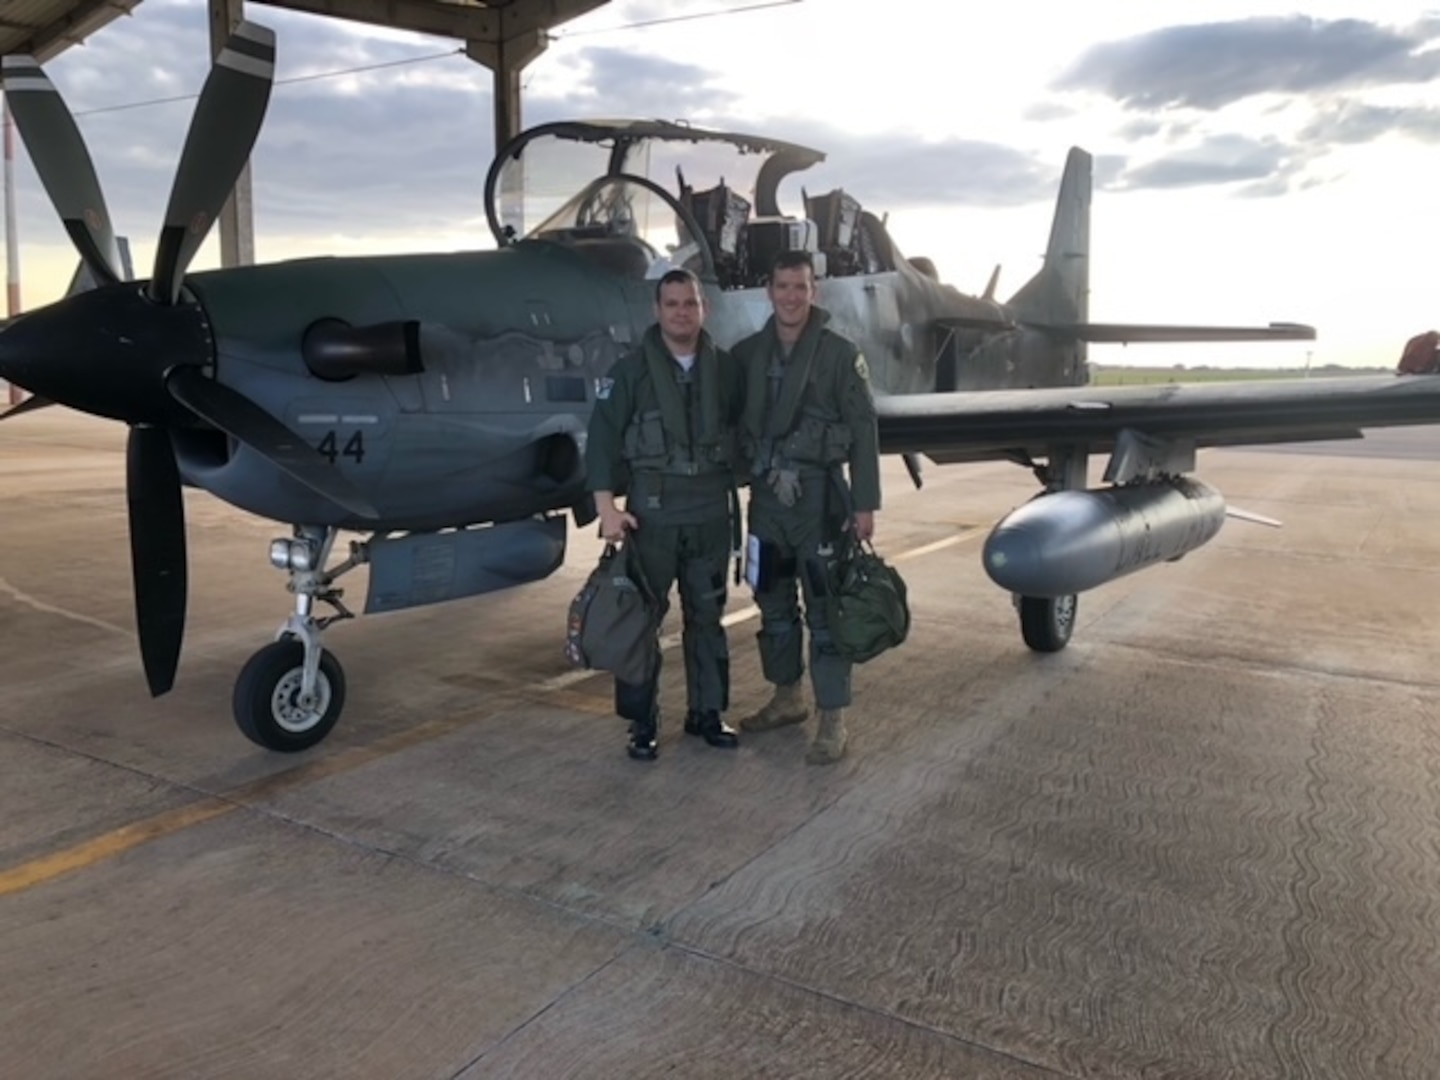 U.S. Air Force Lt. Col. Daniel Griffin, an A-10C Thunderbolt II pilot assigned to the 104th Fighter Squadron, Maryland Air National Guard, with a pilot from the Brazilian Air Force during Exercise Tapio in Campo Grande, Brazil, Aug. 24, 2022. Exercise Tapio is a Brazilian combat search and rescue and close air support exercise that ended Aug. 31.